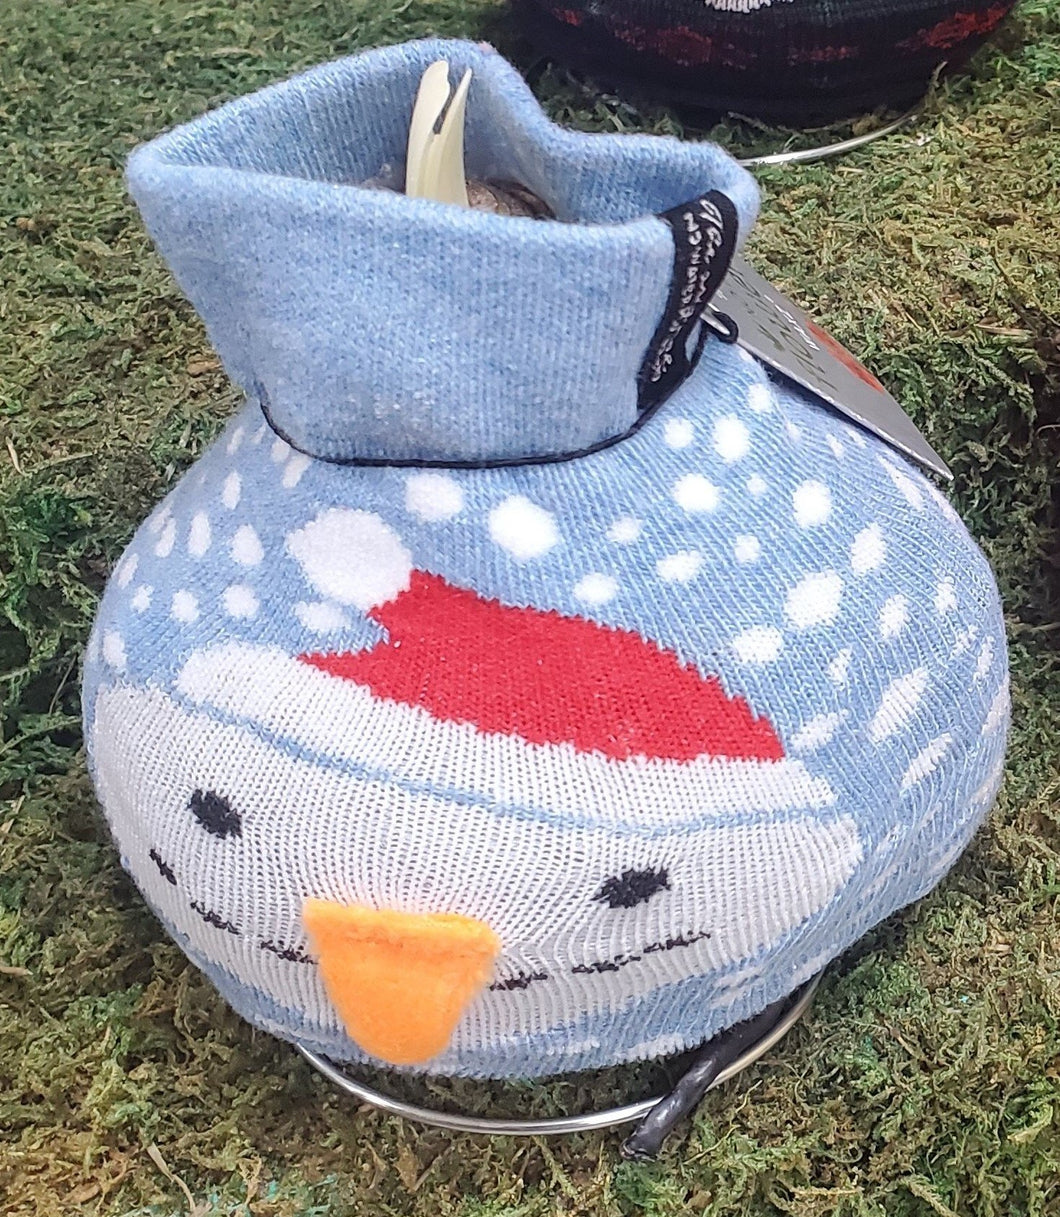 light blue sock with a snowman's face and snowflakes in the background over top of a wax coated amaryllis bulb